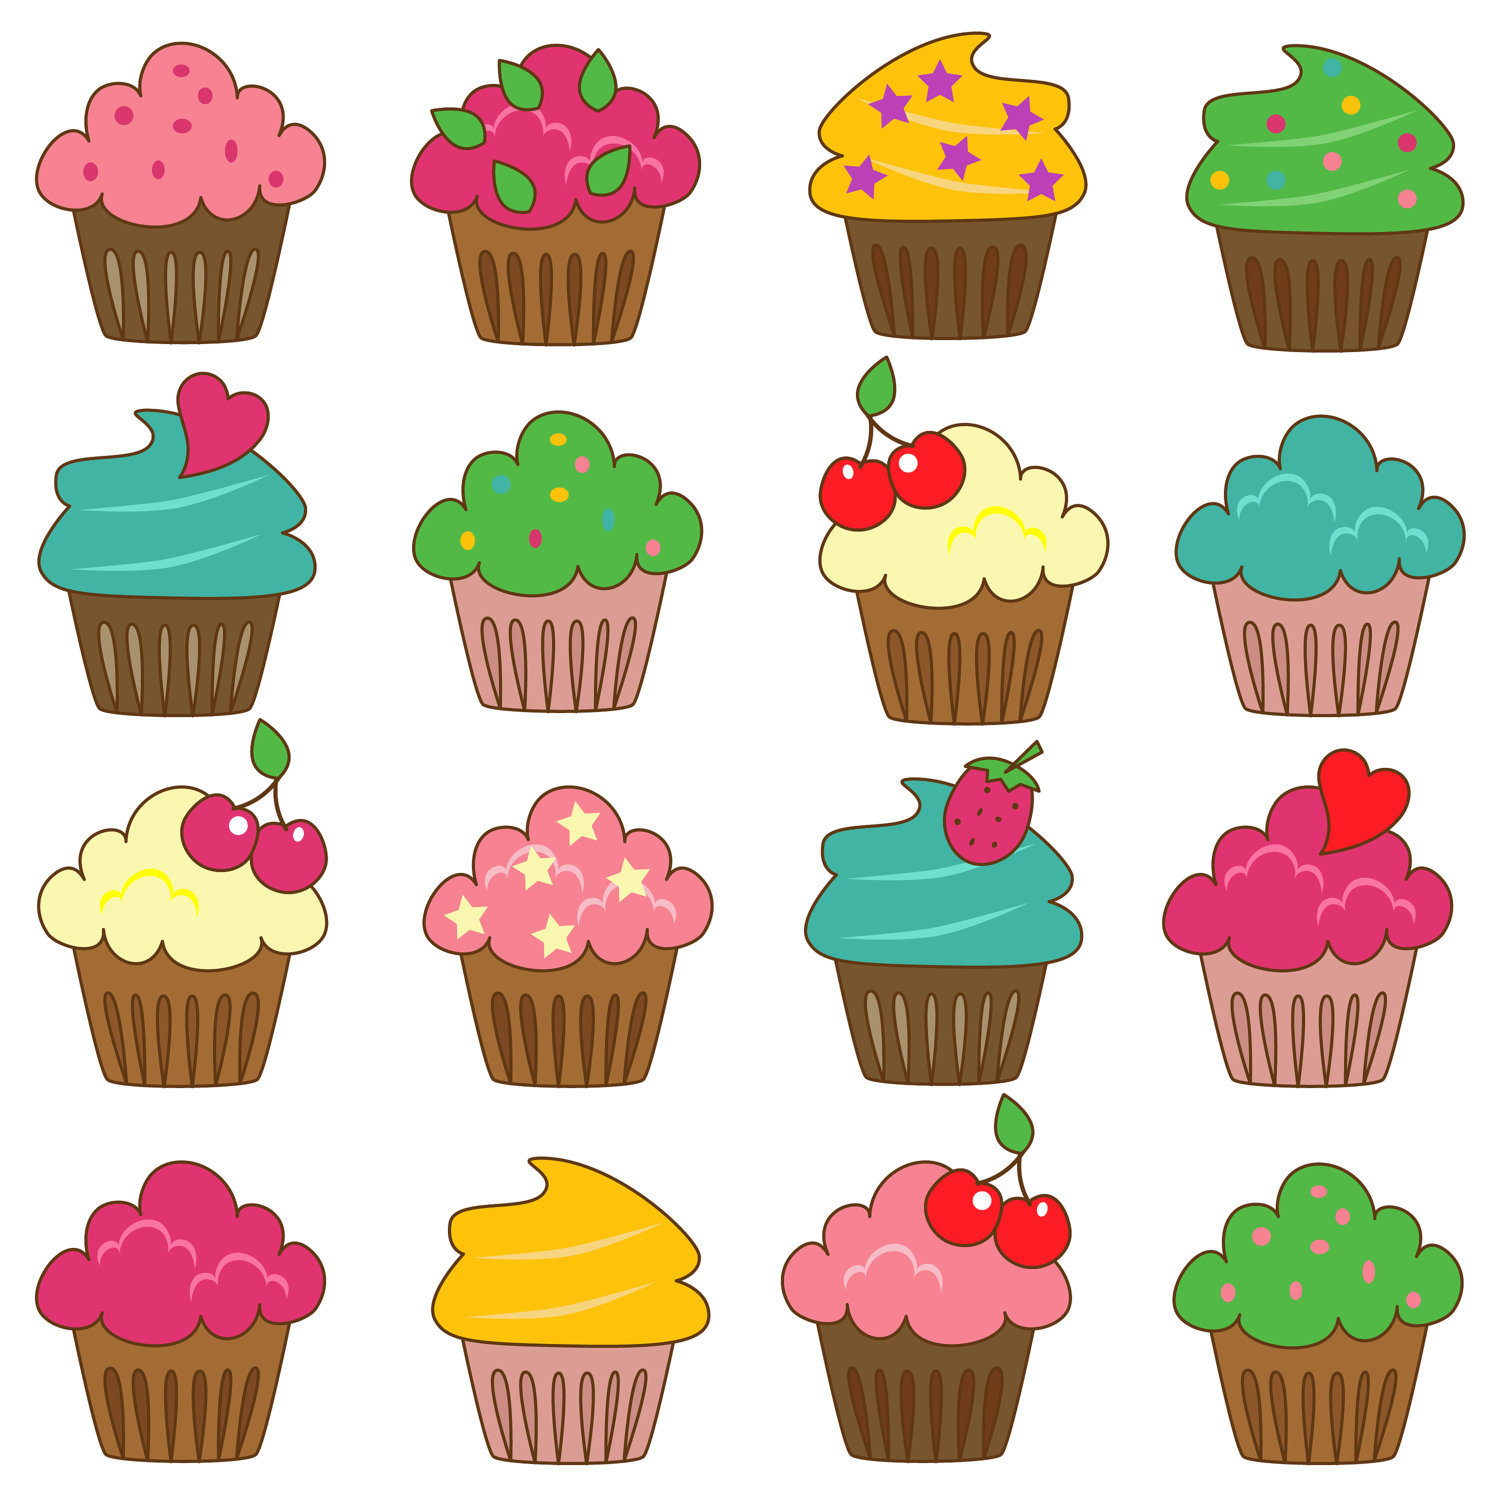 Free Cartoon Cupcakes Clipart, Download Free Cartoon Cupcakes Clipart png images, Free ClipArts